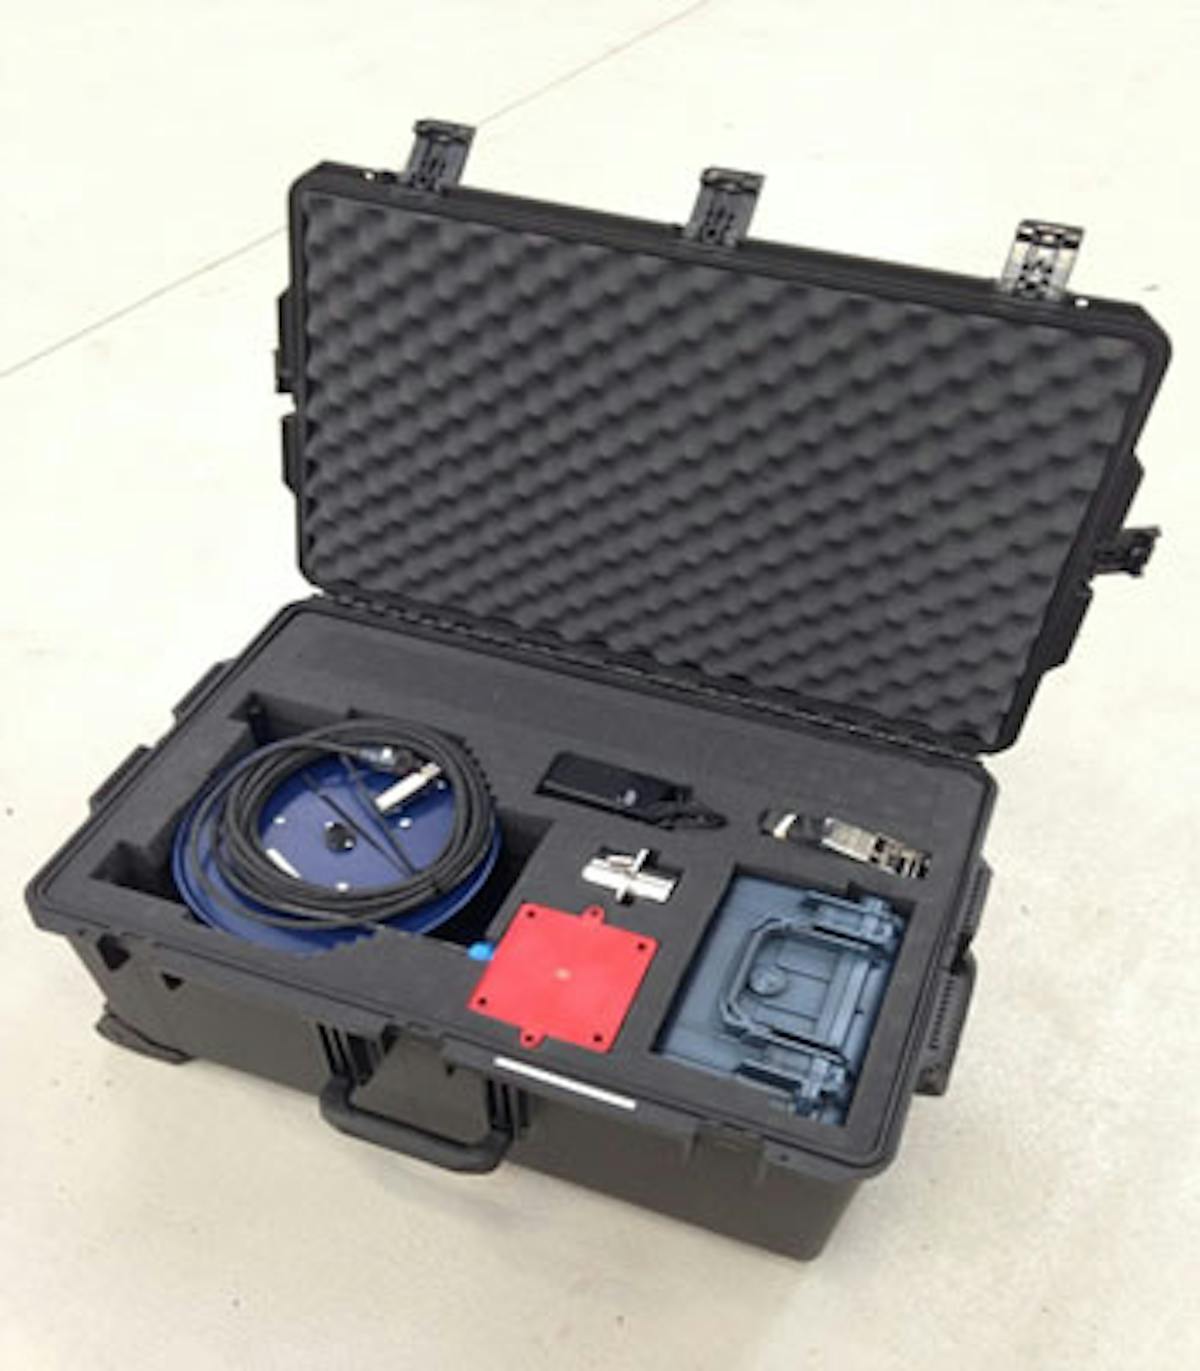 Portable Zone 0, tool detection alarm system.